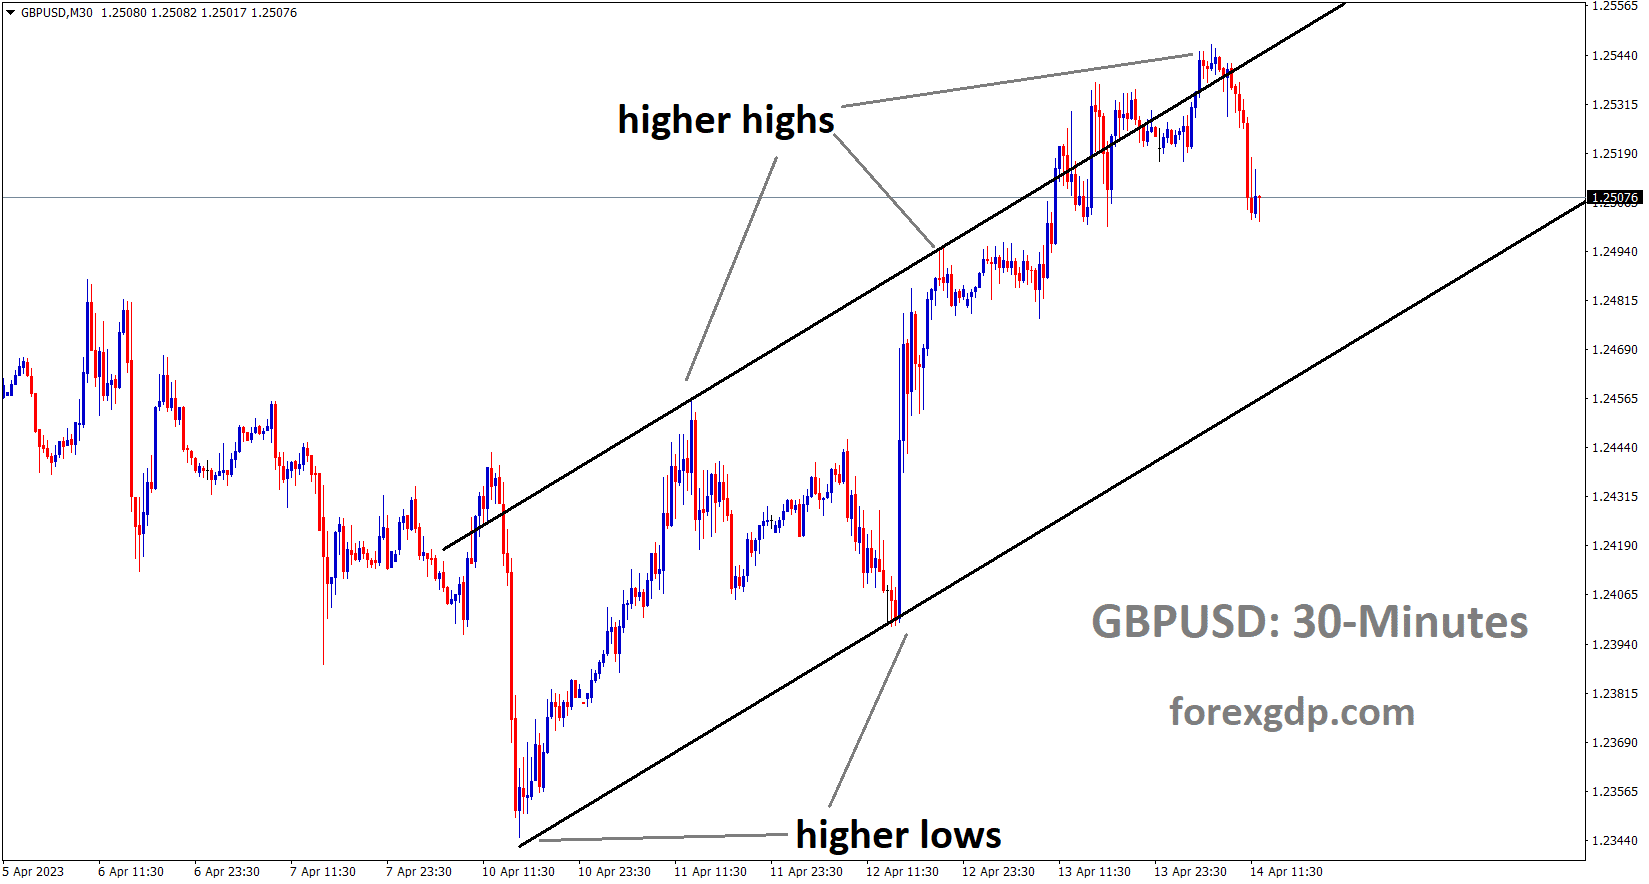 GBPUSD is moving in an Ascending channel and the market has fallen from the higher high area of the channel 1